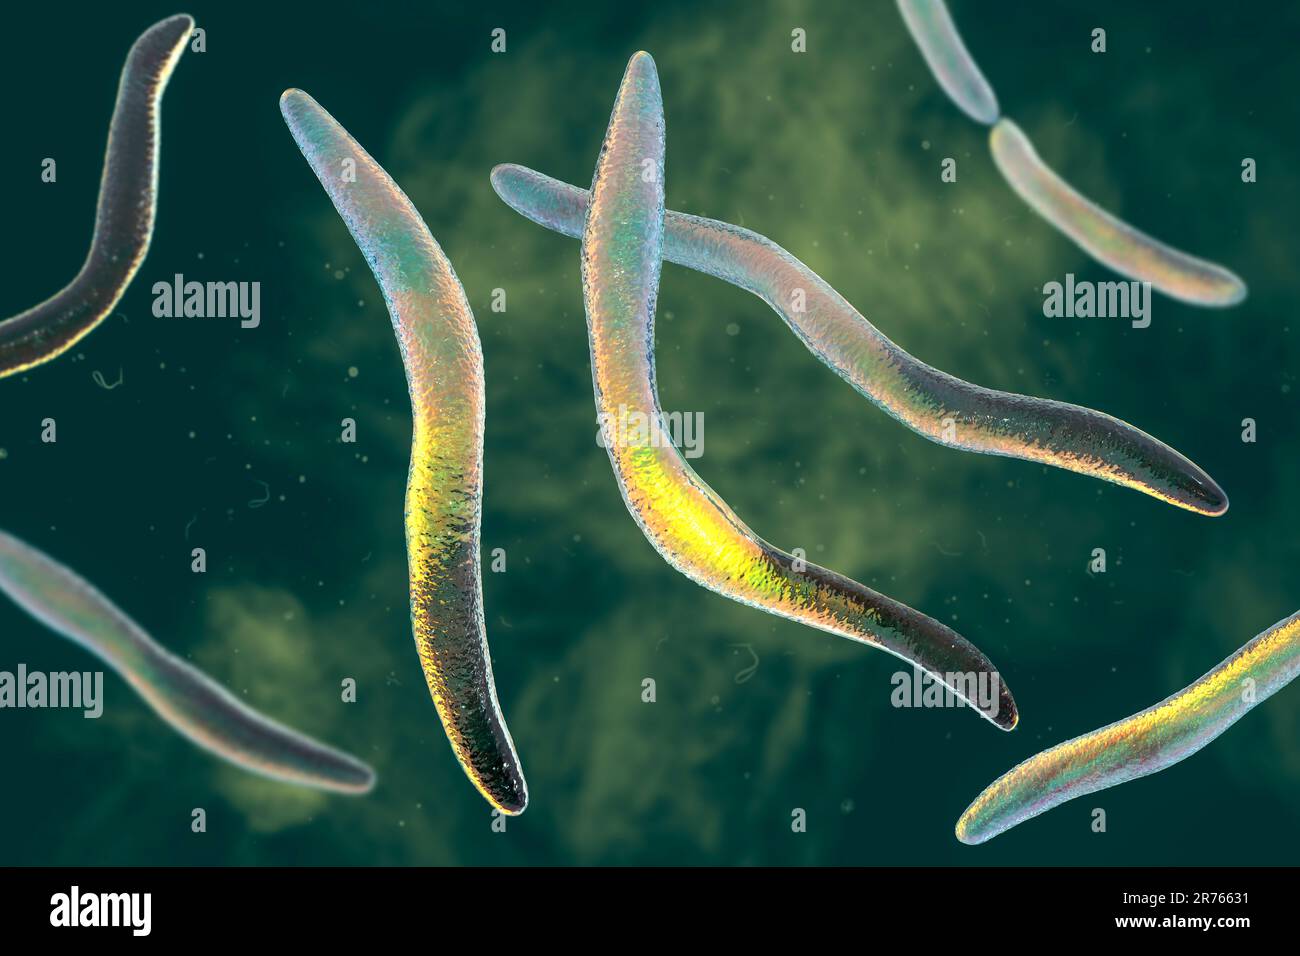 Fusobacterium bacteria, computer illustration. Gram-negative, anaerobic, non-motile rod-shaped prokaryotes (characterized by a long, slender shape and Stock Photo